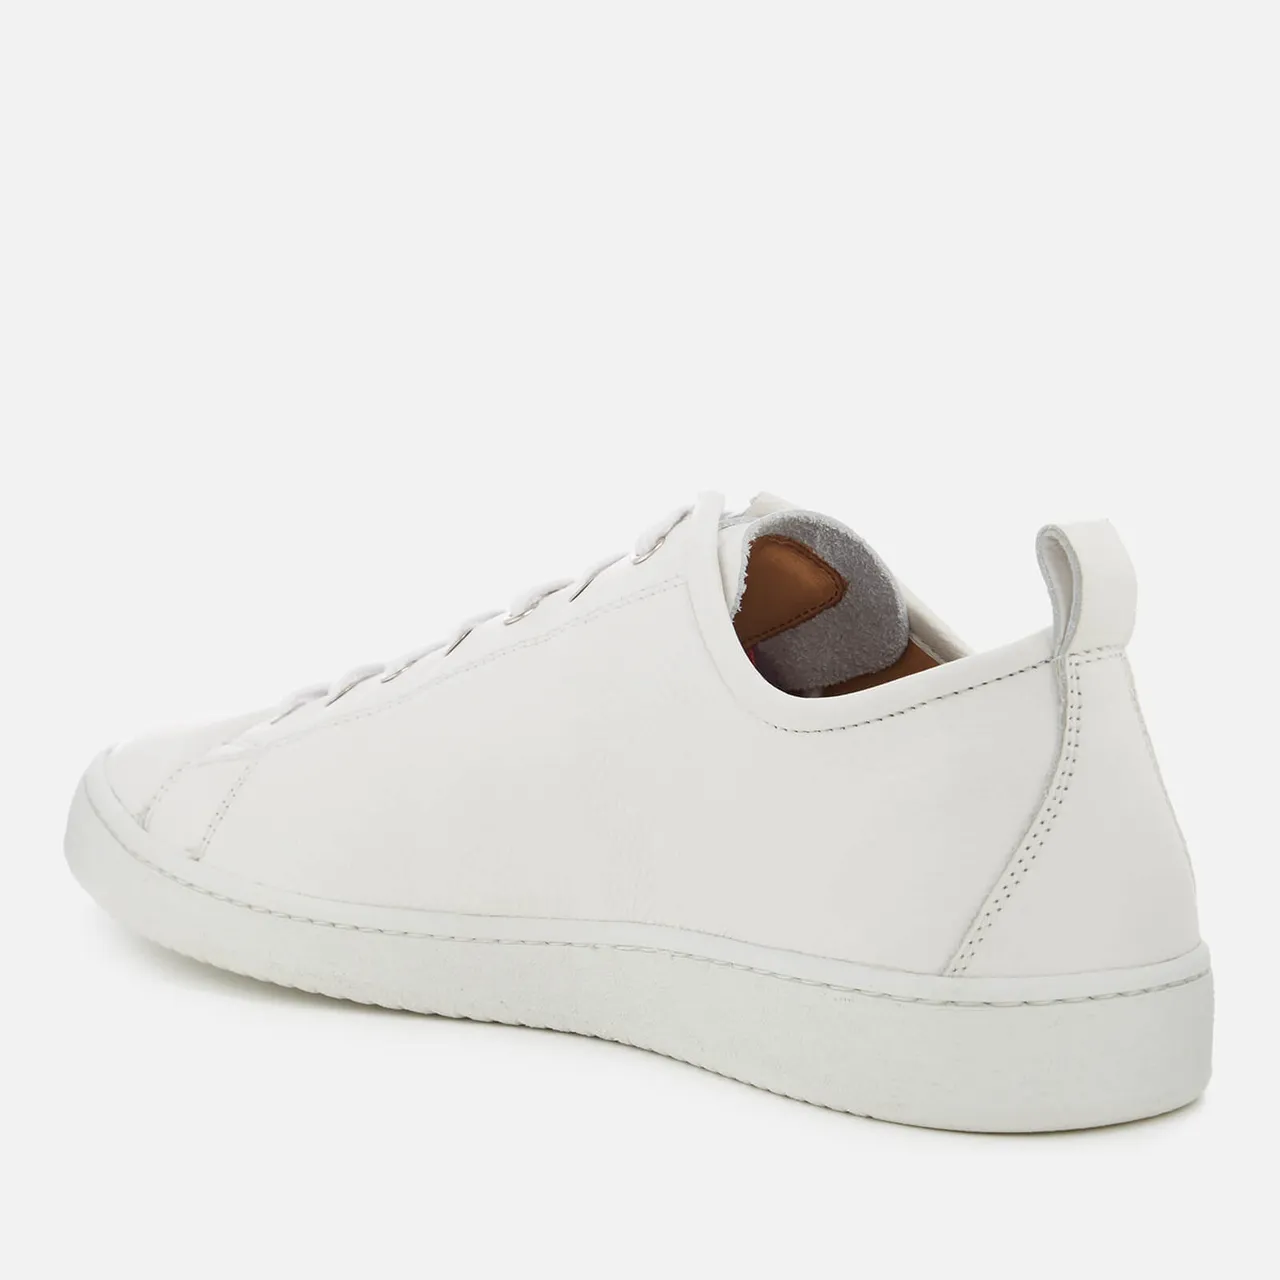 PS Paul Smith Men's Miyata Leather Low Top Trainers - White - UK